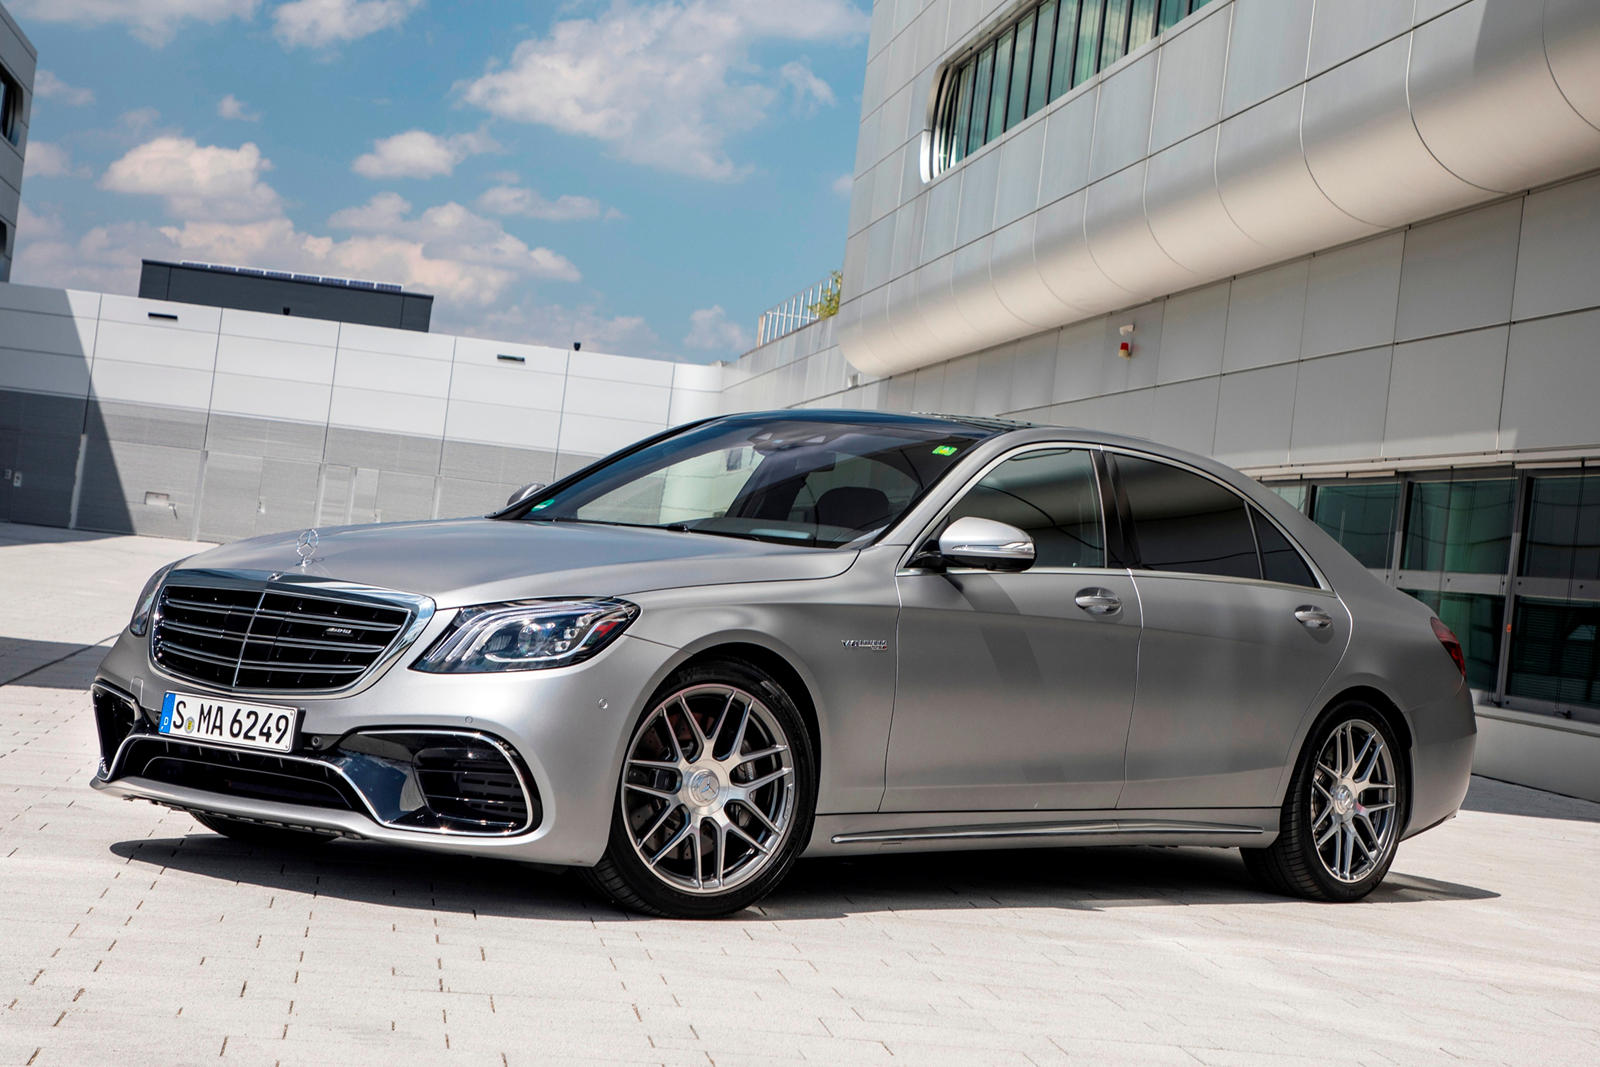 2018 Mercedes-AMG S63 Sedan: Review, Trims, Specs, Price, New Interior  Features, Exterior Design, and Specifications | CarBuzz